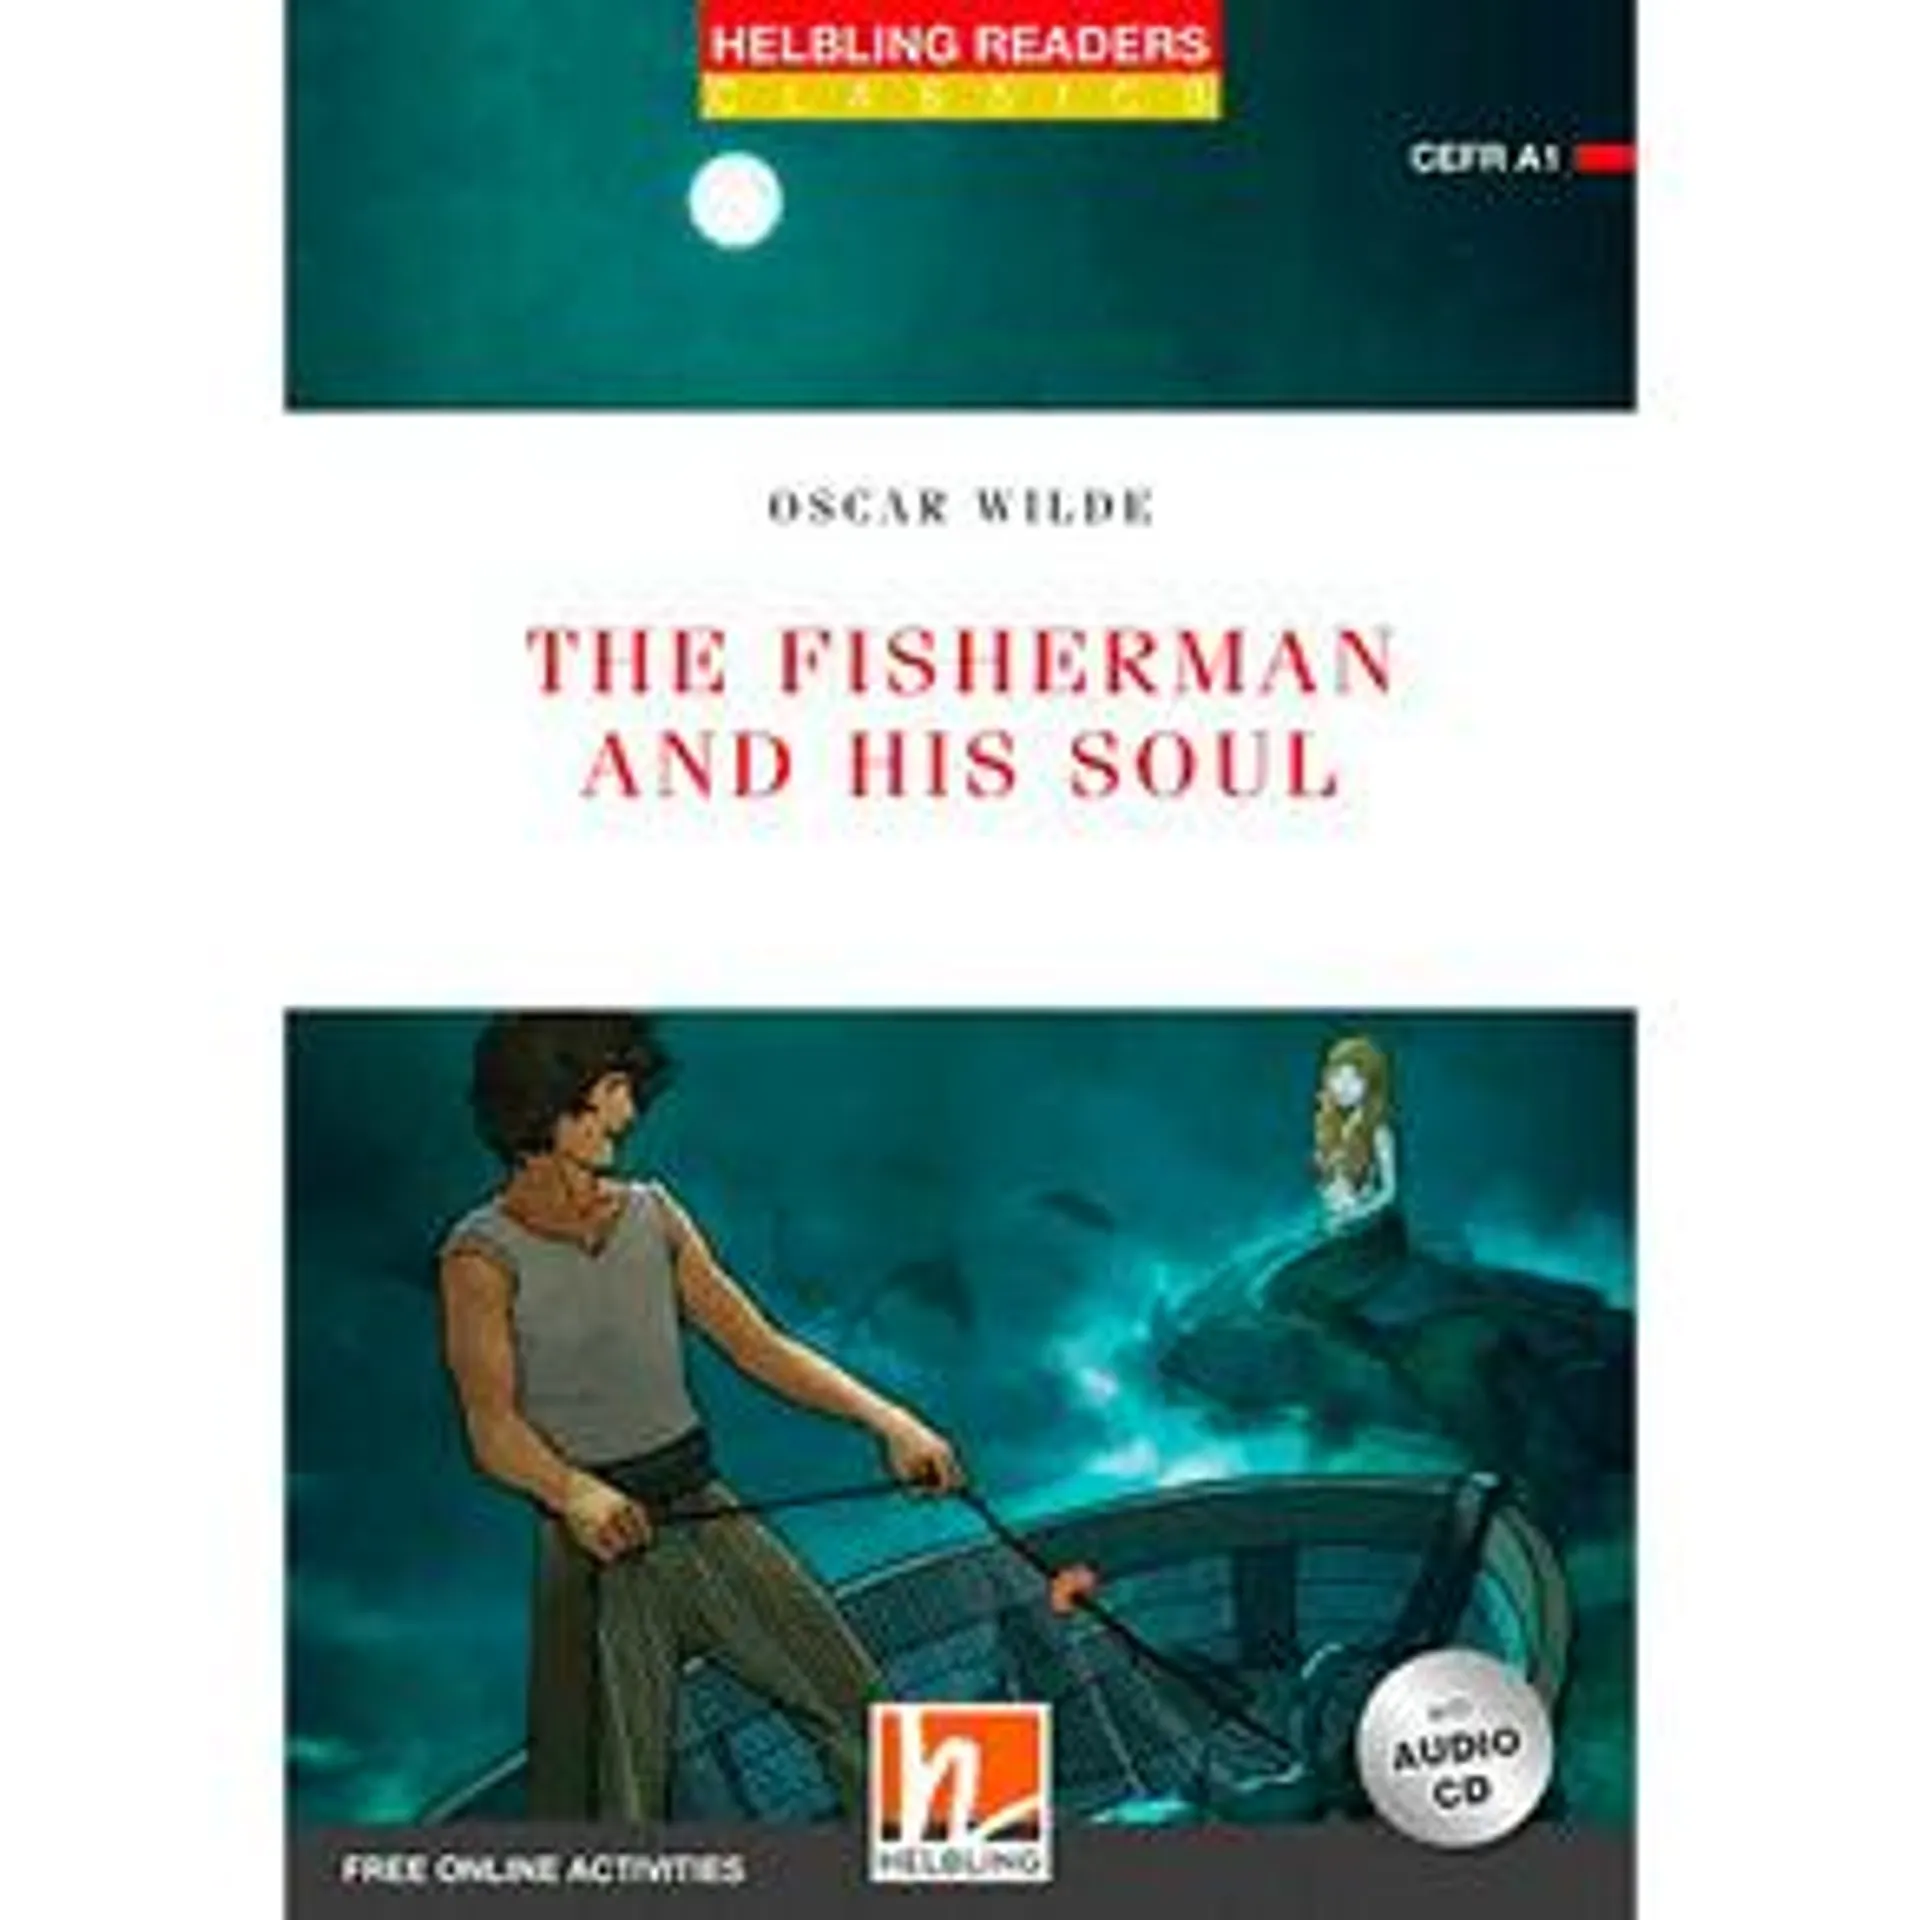 HR1 Classics - The Fisherman and his Soul (New Edition) with Audio CD and e-Zone